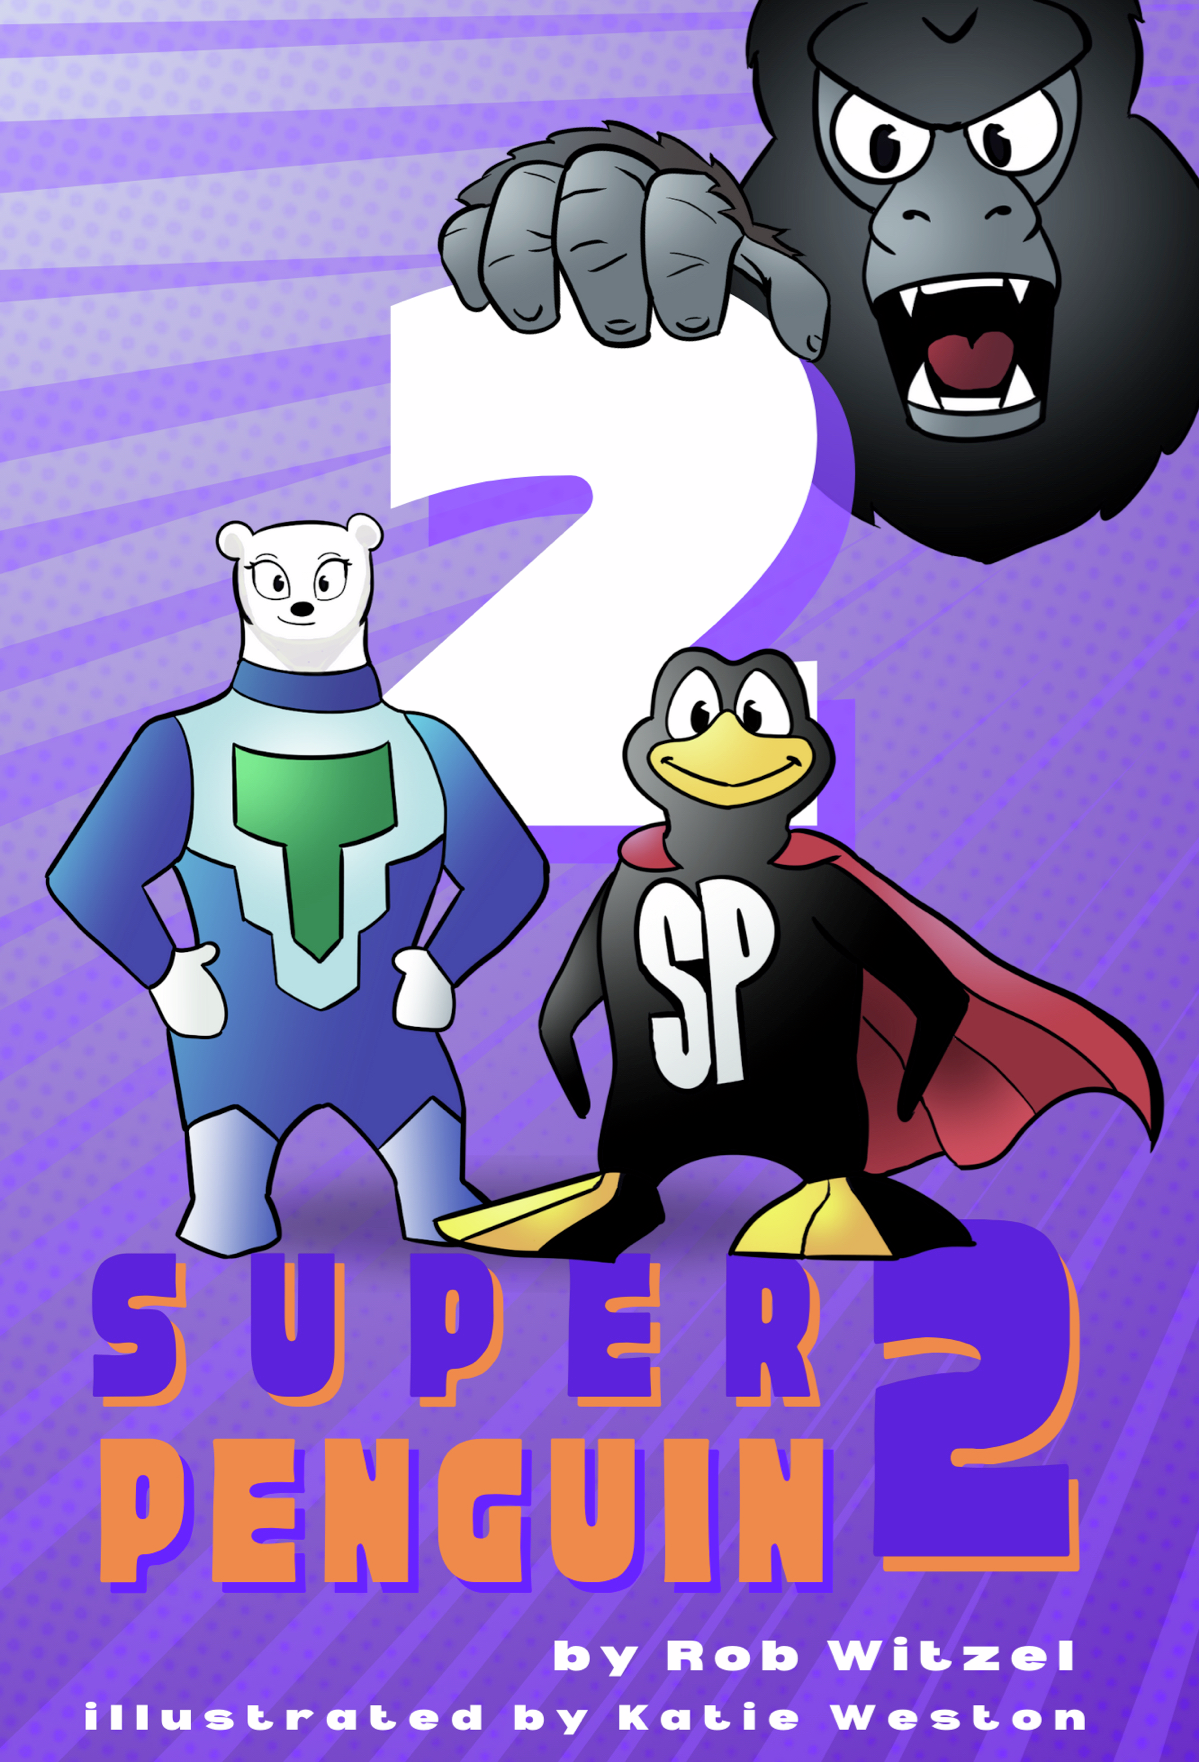 The Community Connection May 24th - Super Penguin 2 by Rob Witzel